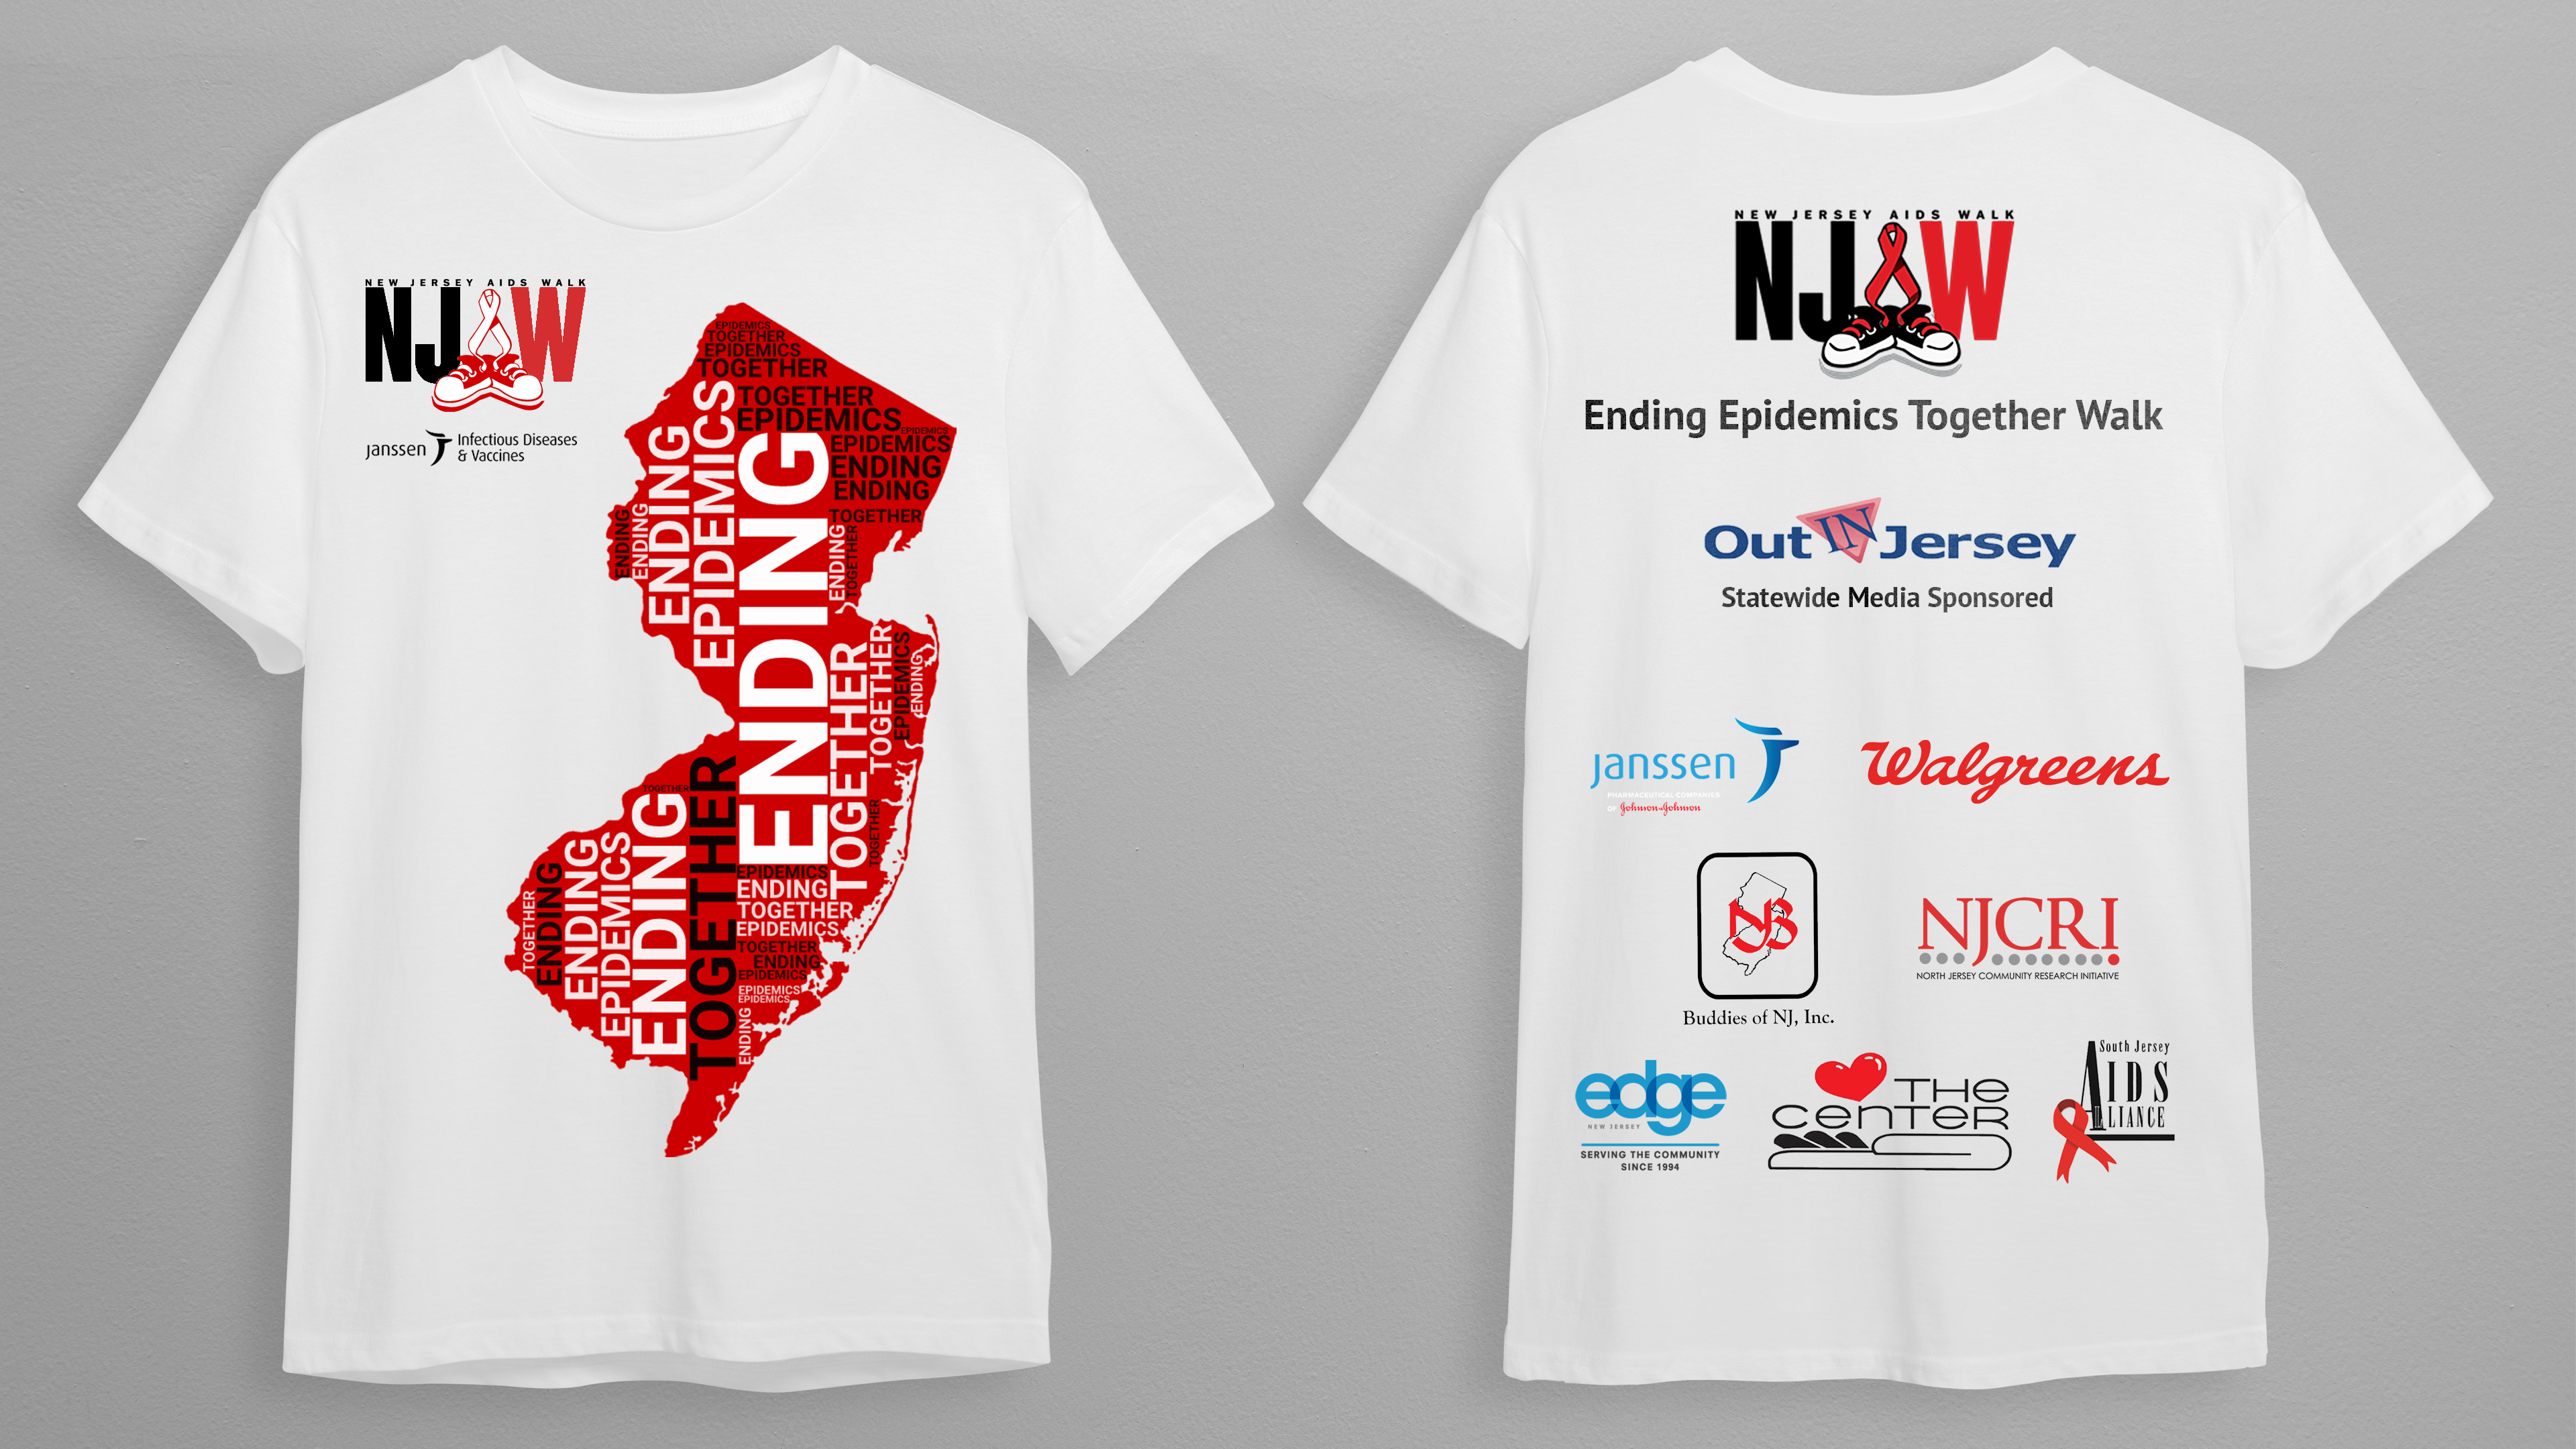 Collaboratively designed t-shirt artwork for the 2023 New Jersey AIDS Walk, in partnership with "Out in Jersey."